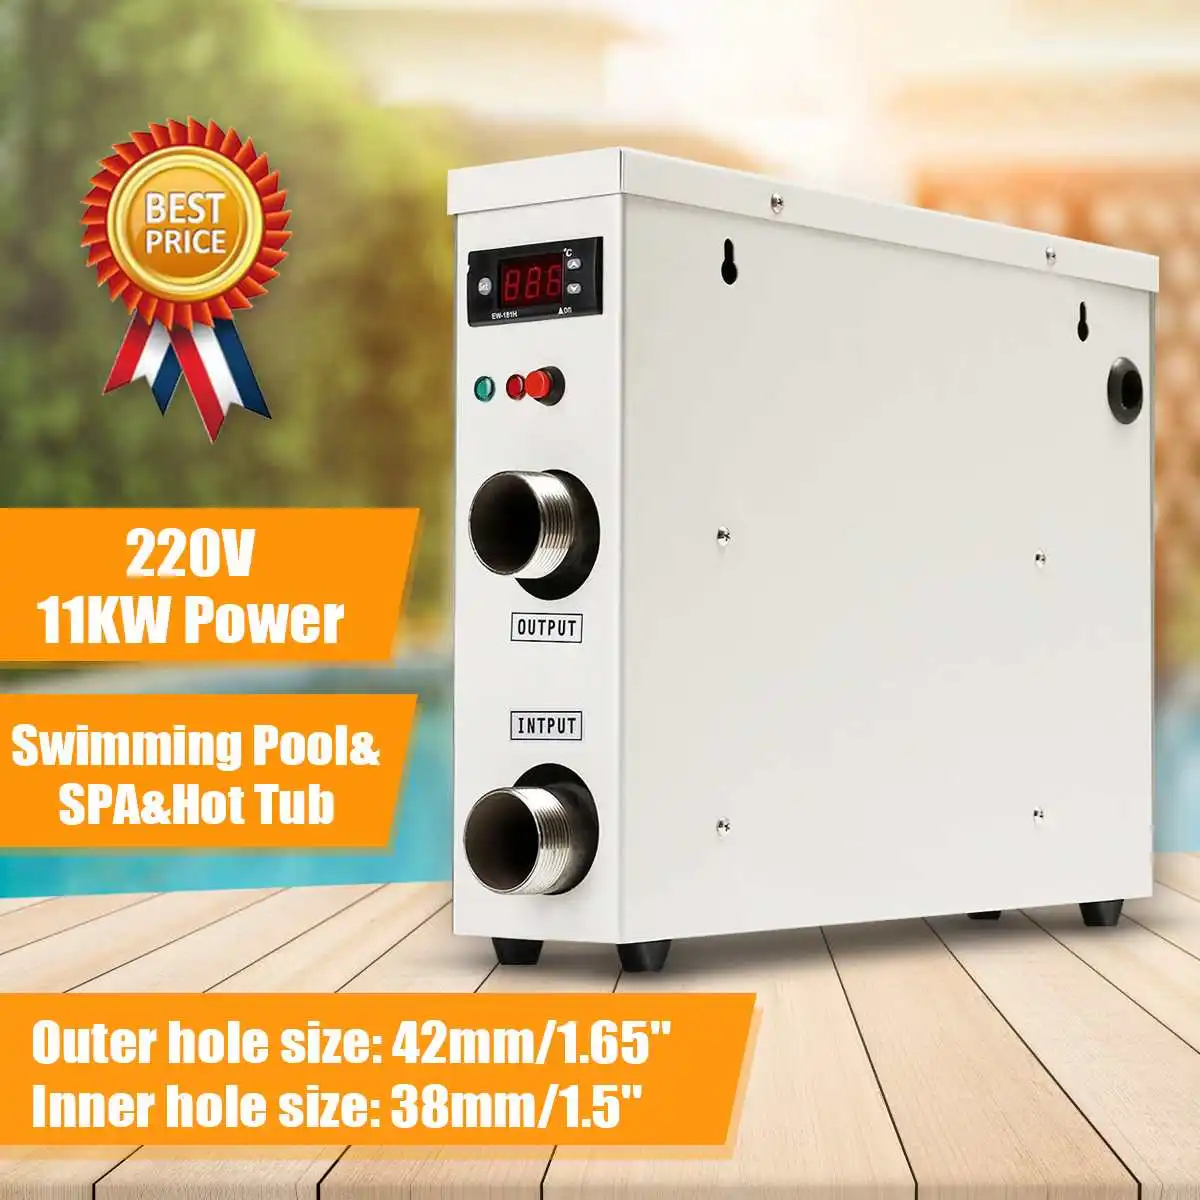 

warmtoo 11kW 220V Electric Digital Water Heater Thermostat for Swimming Pool SPA Hot Tub Bath Water Heating Water